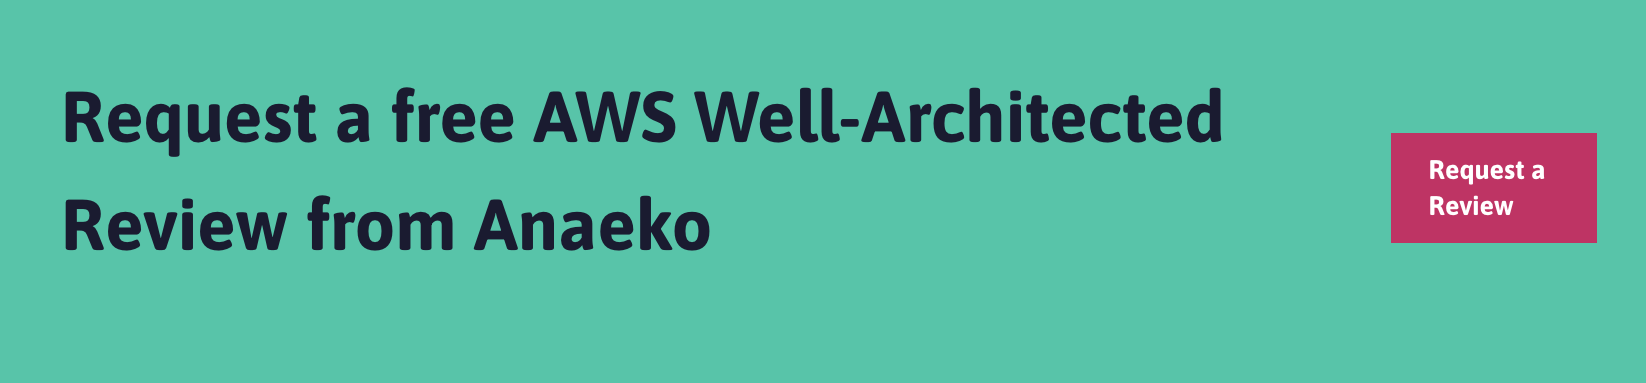 aws-well-architected-review-anaeko